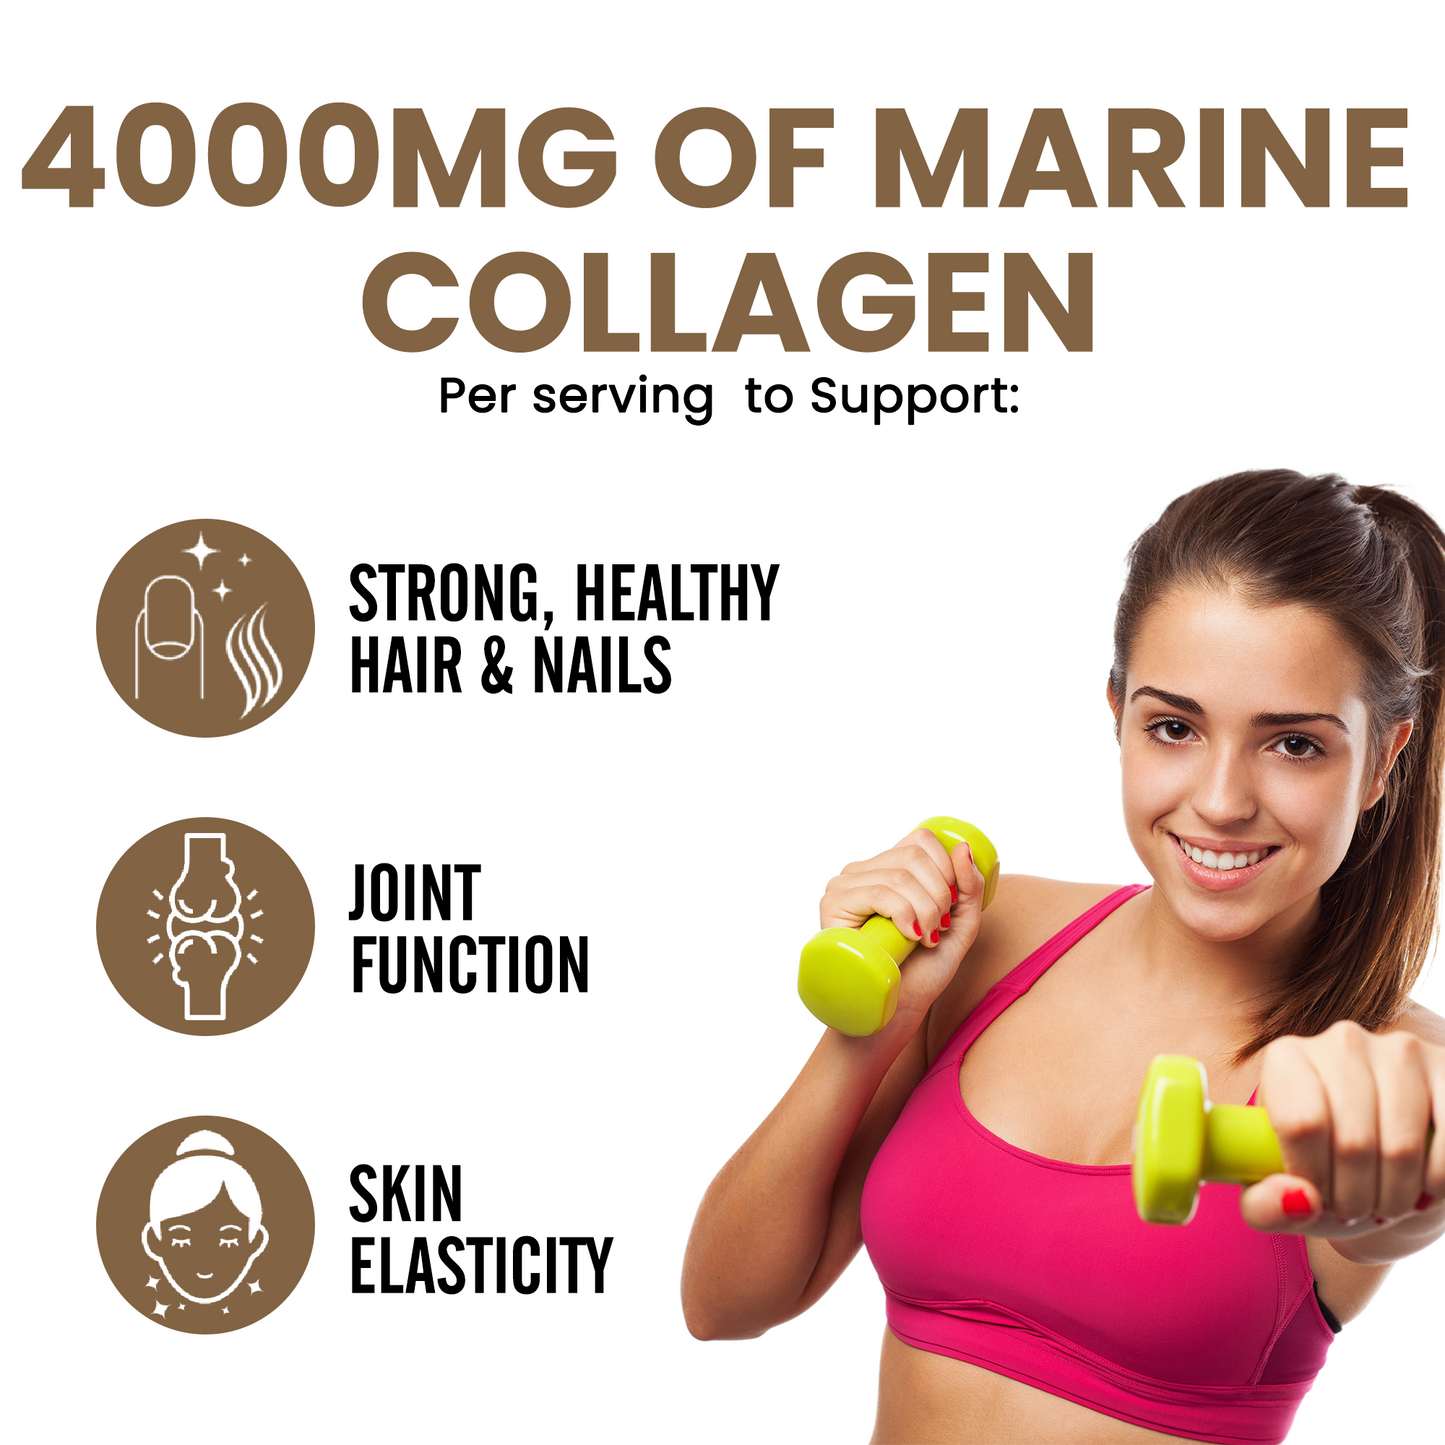 Forest Performance Protein. |Collagen, Whey & Superfoods.|